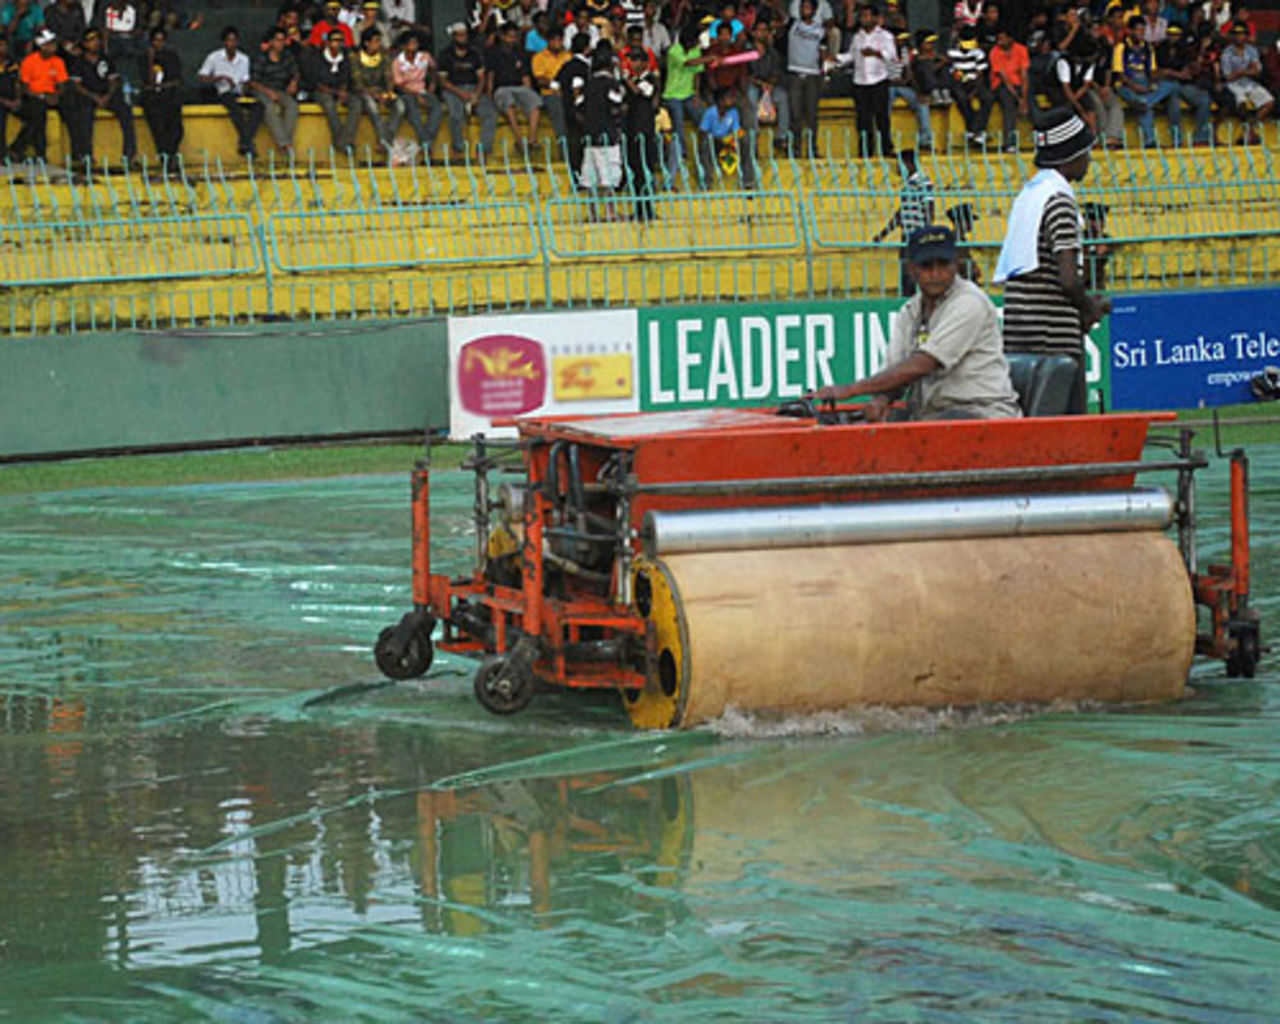 The Super Sopper comes into action before the start, Colombo, September 4, 2009